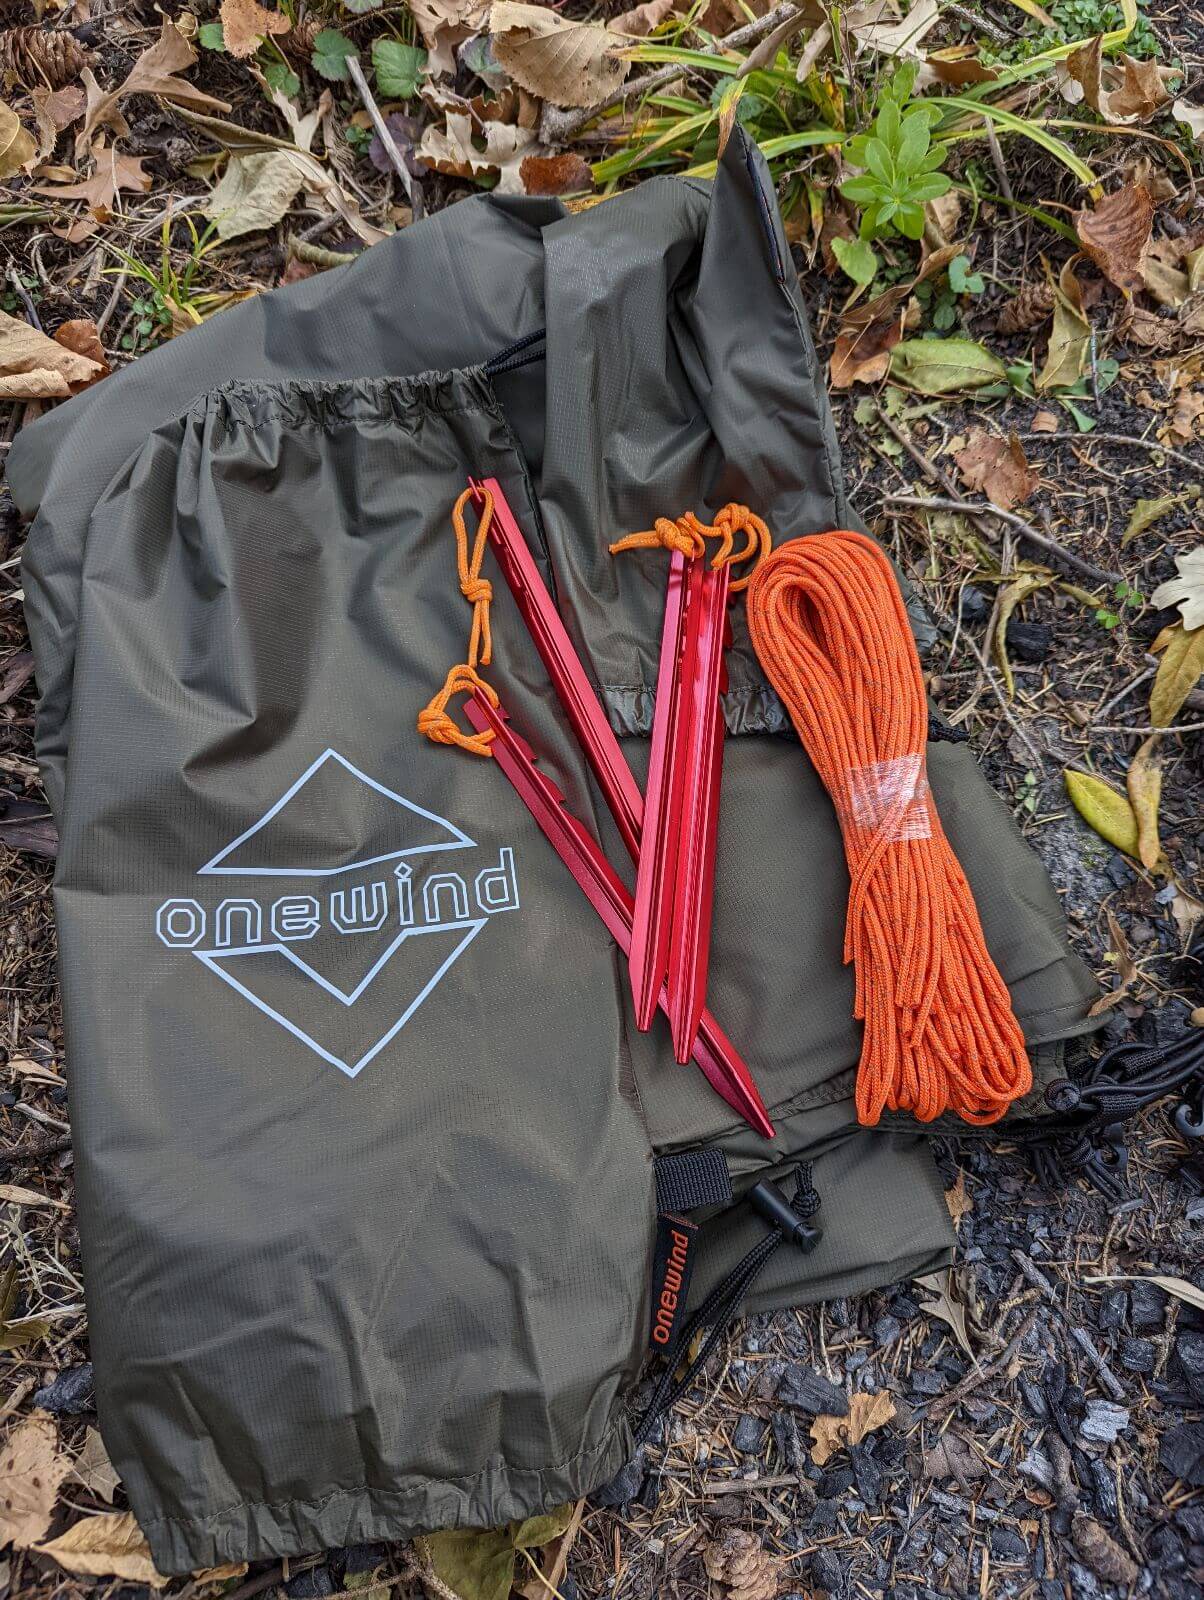 The rain fly comes with stakes and guyline to set it up as well as bags to keep it organized.